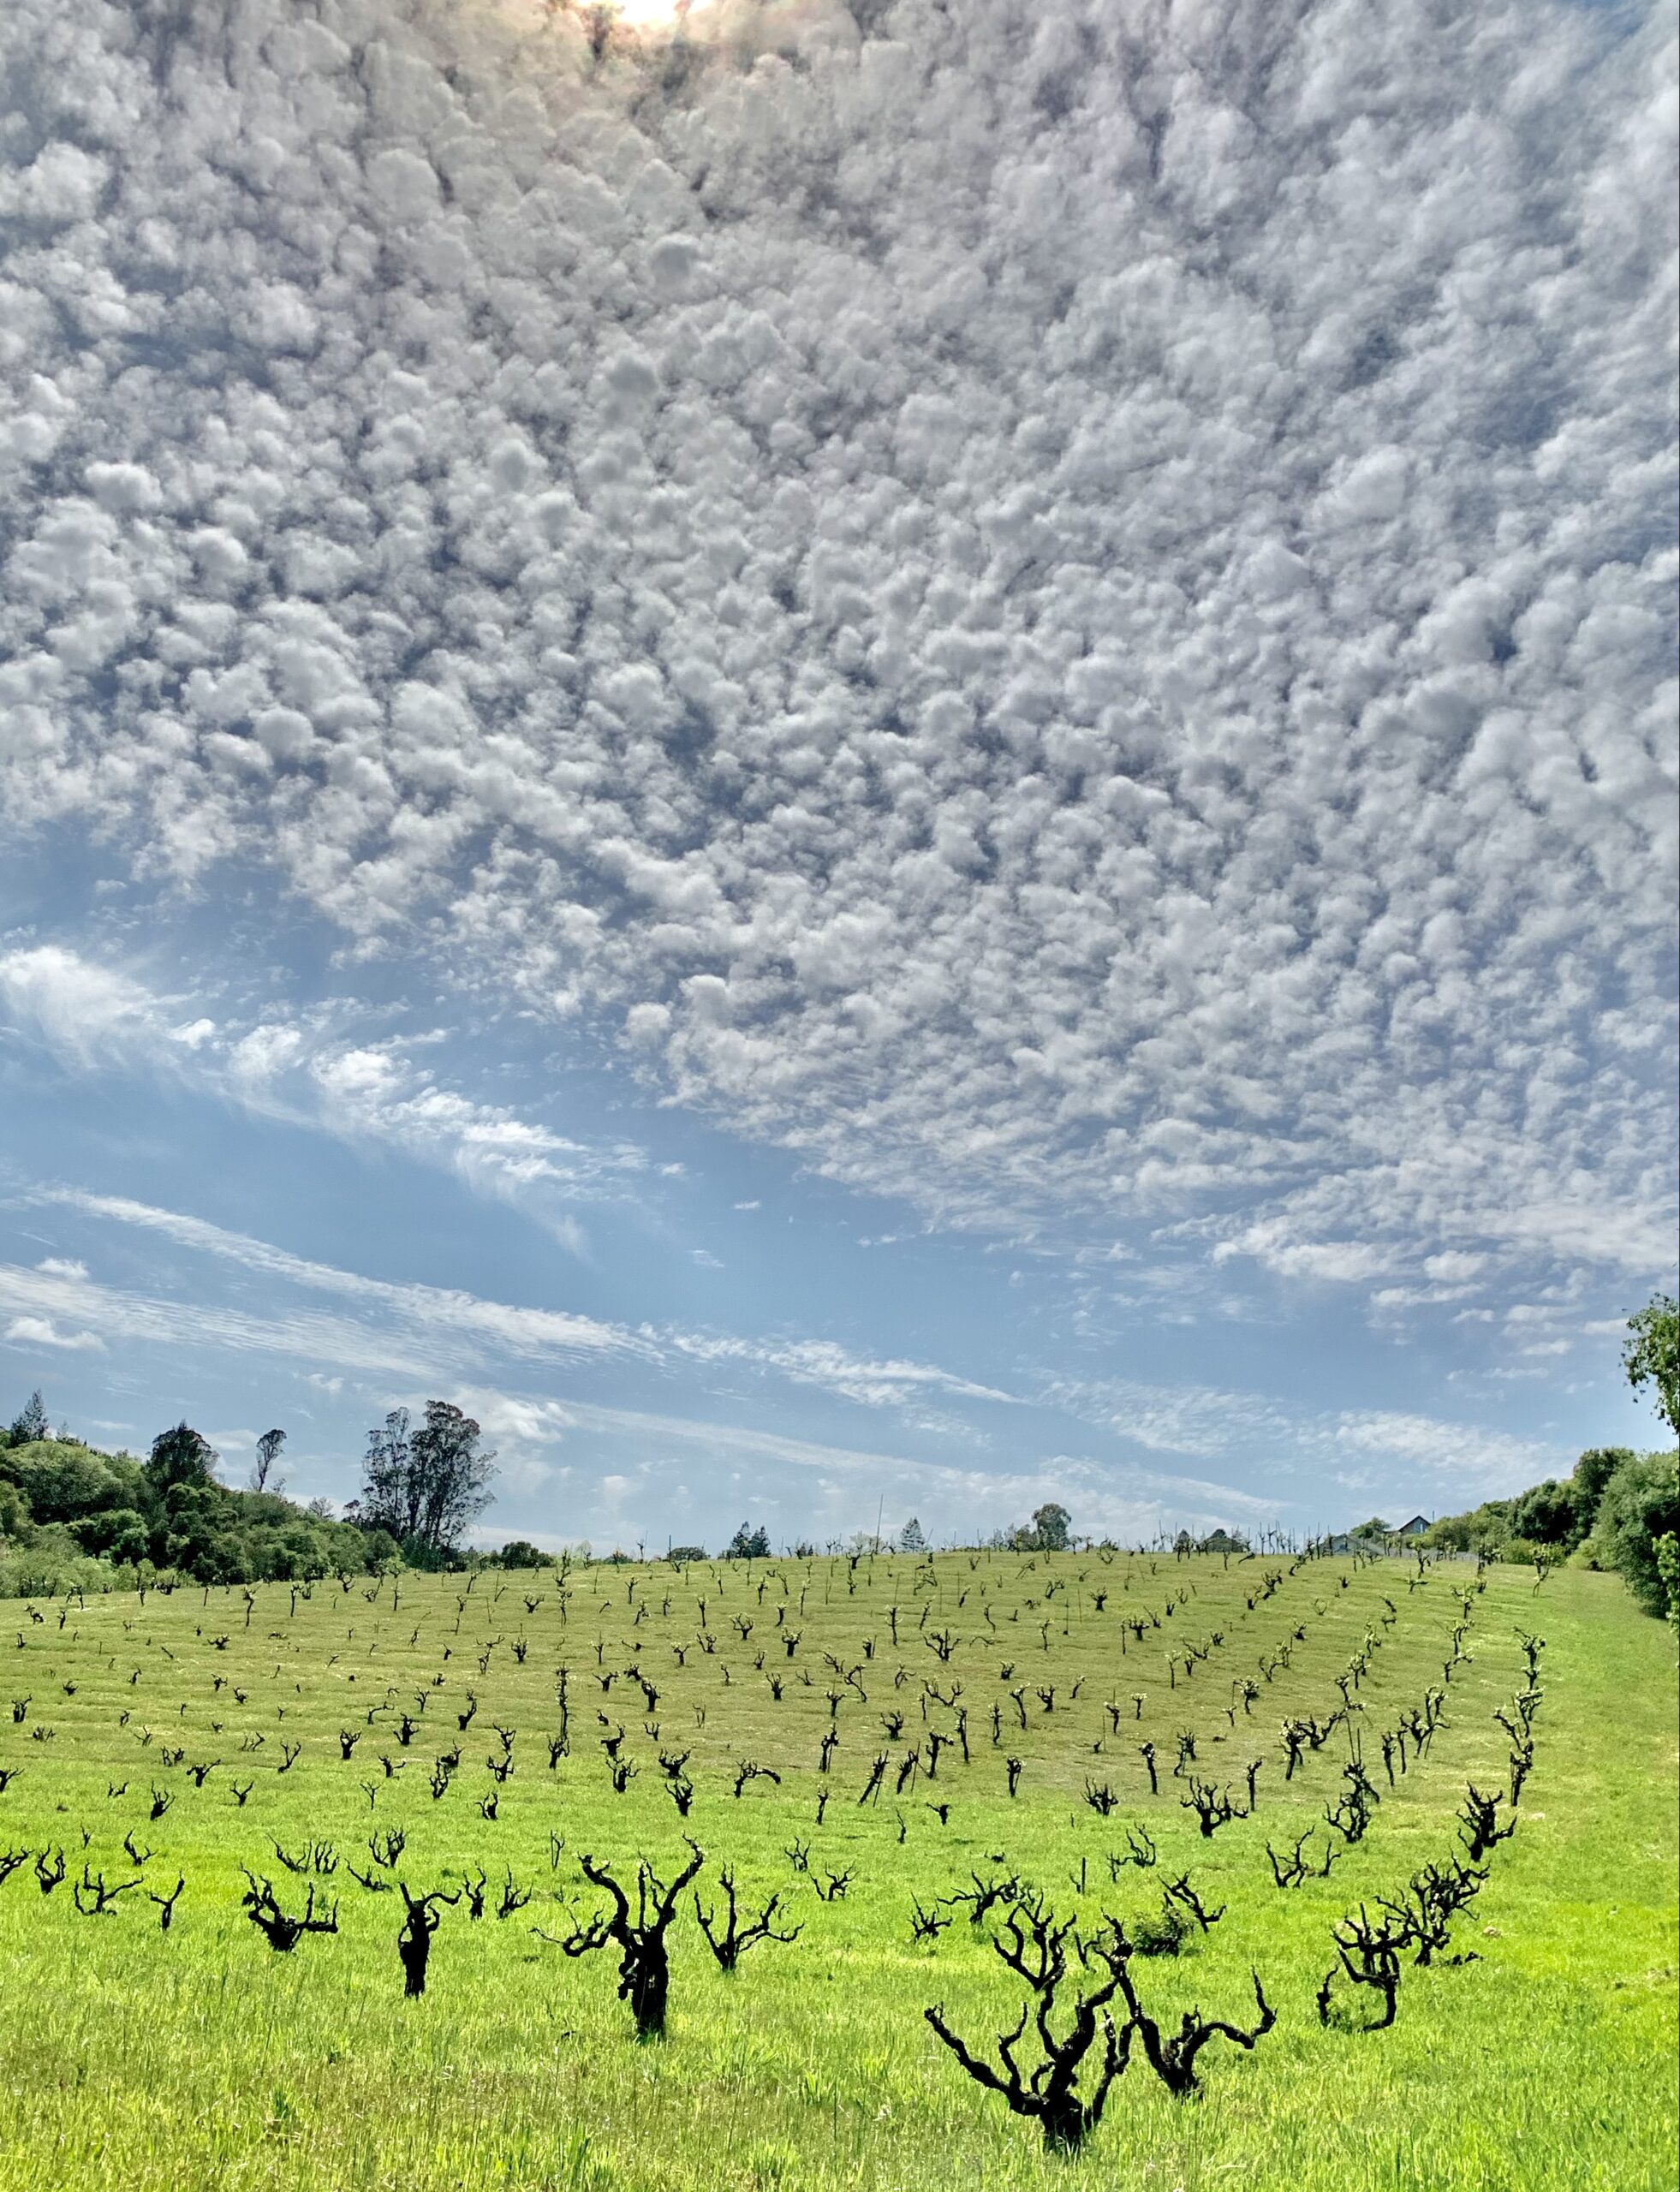 A field of grapes under a cloudy sky.